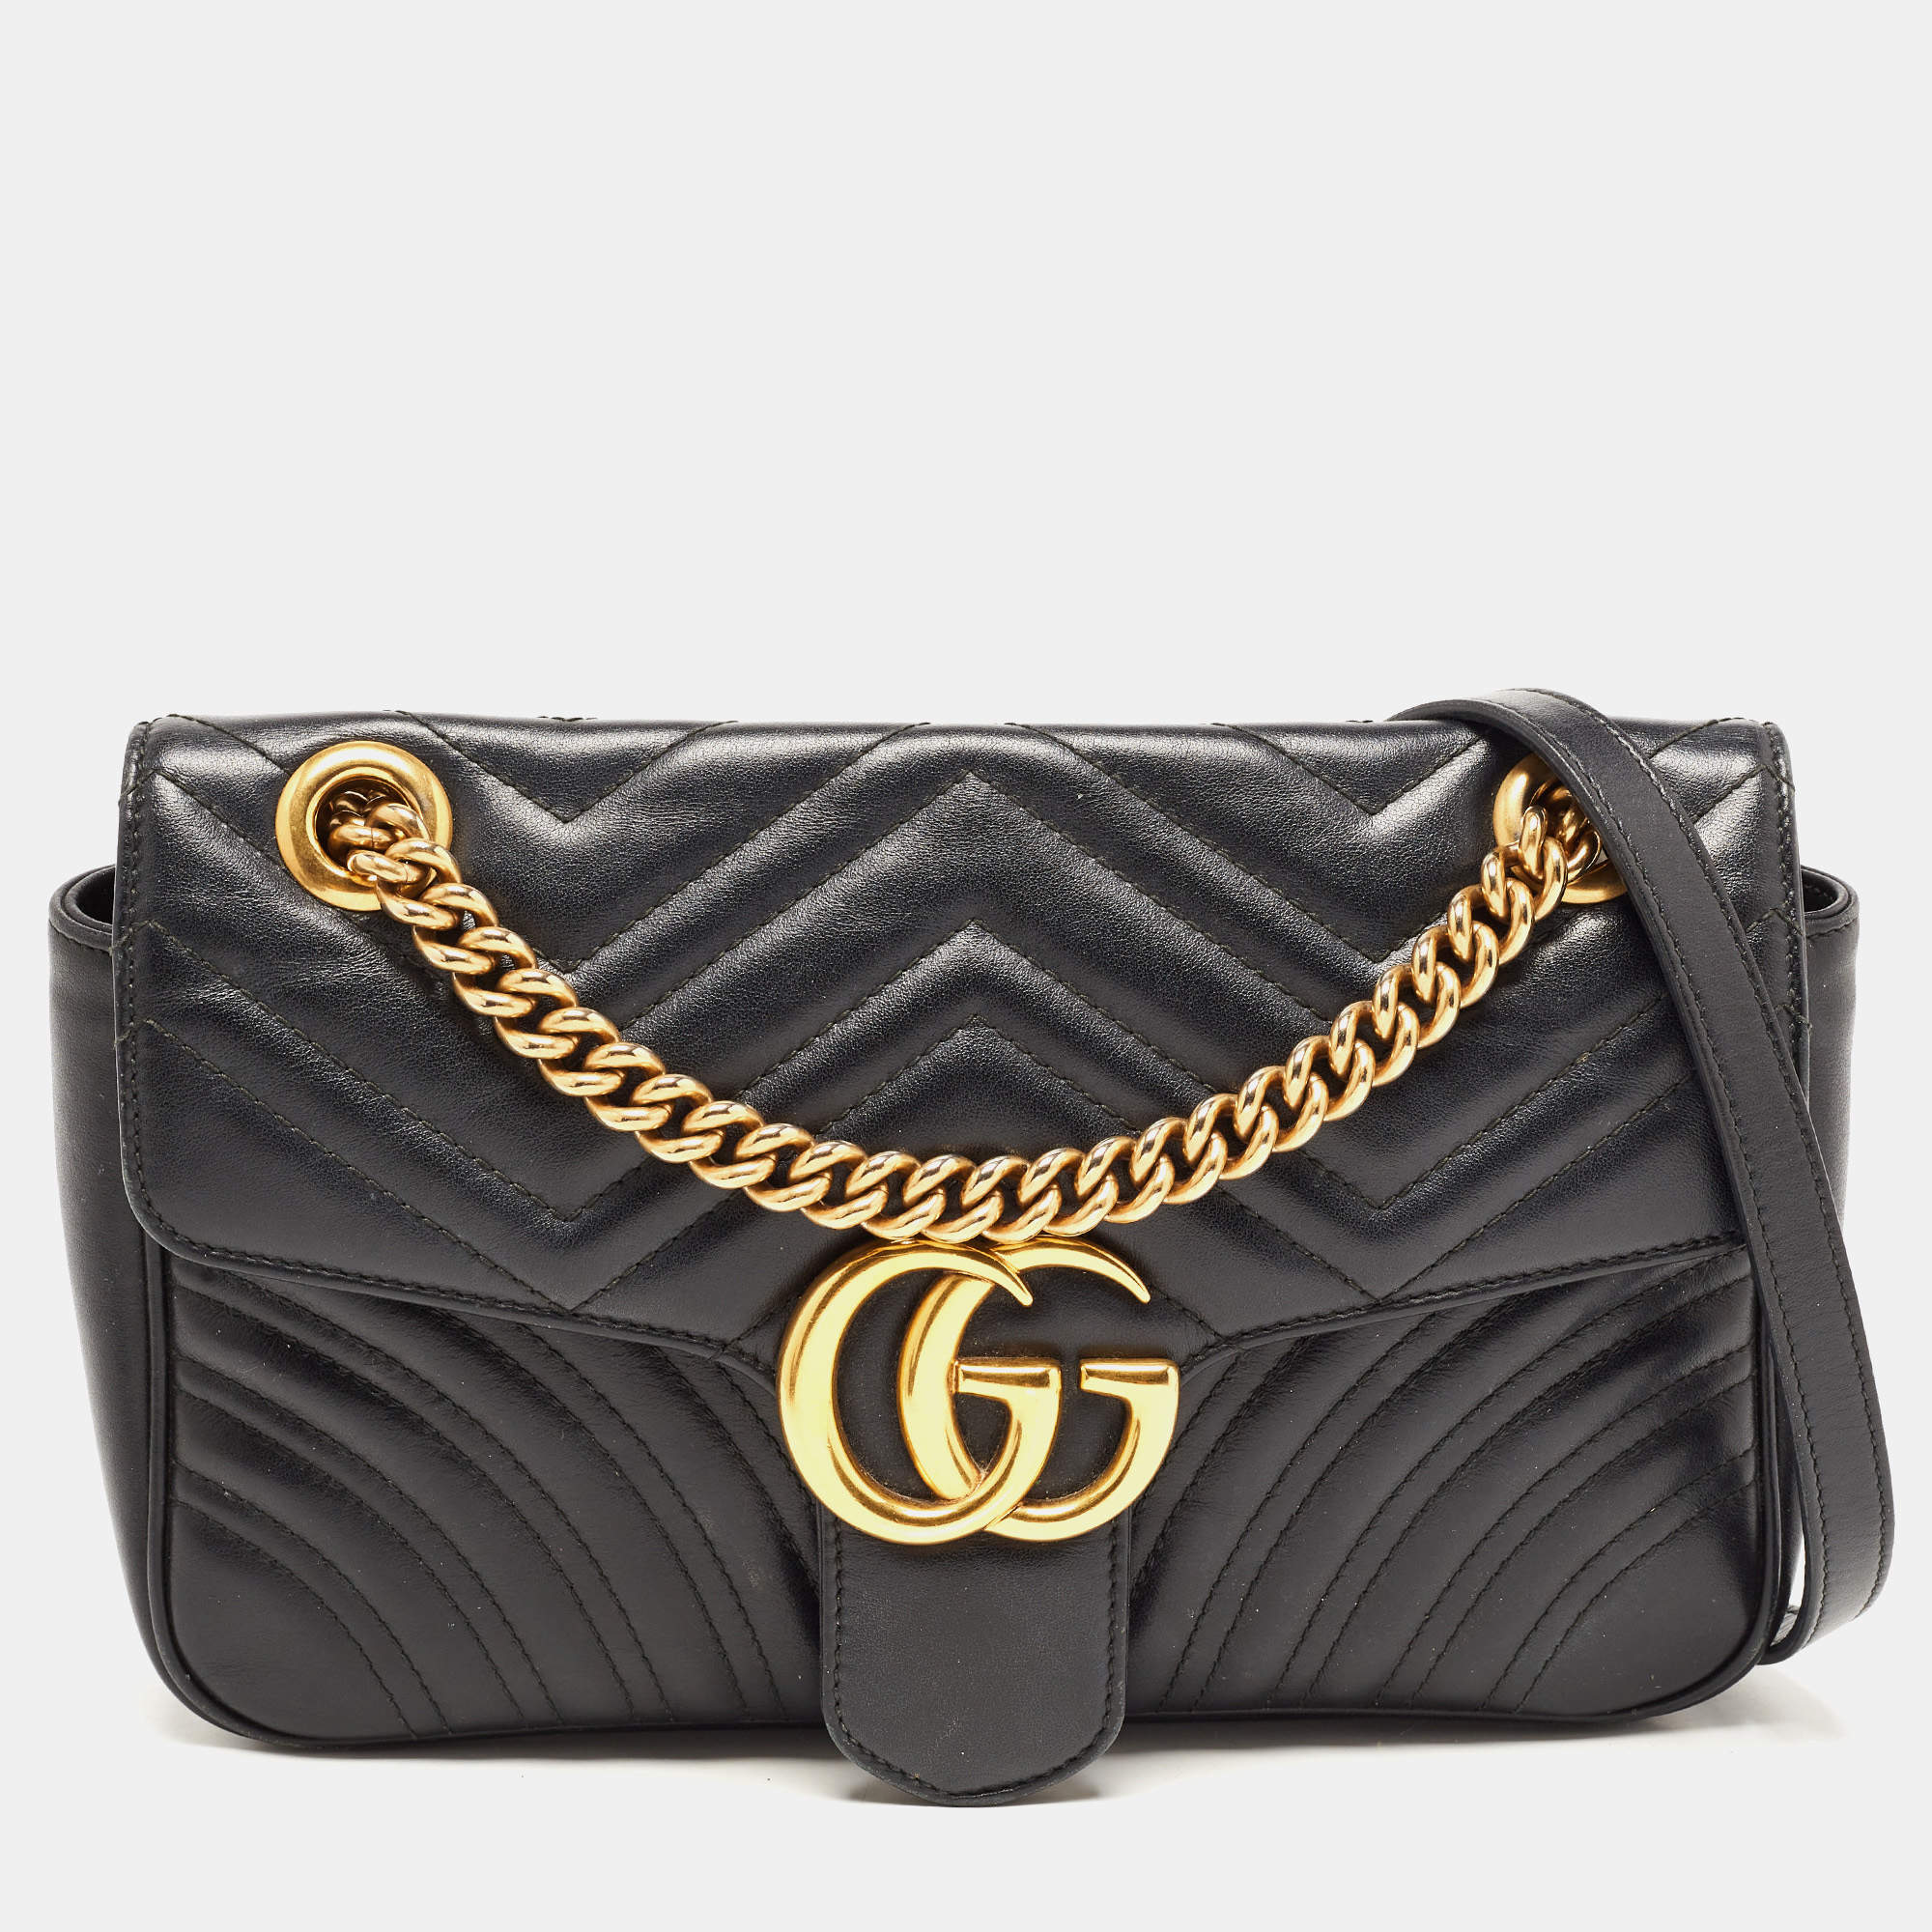 Gucci Black Quilted Leather Small GG Marmont Shoulder Bag